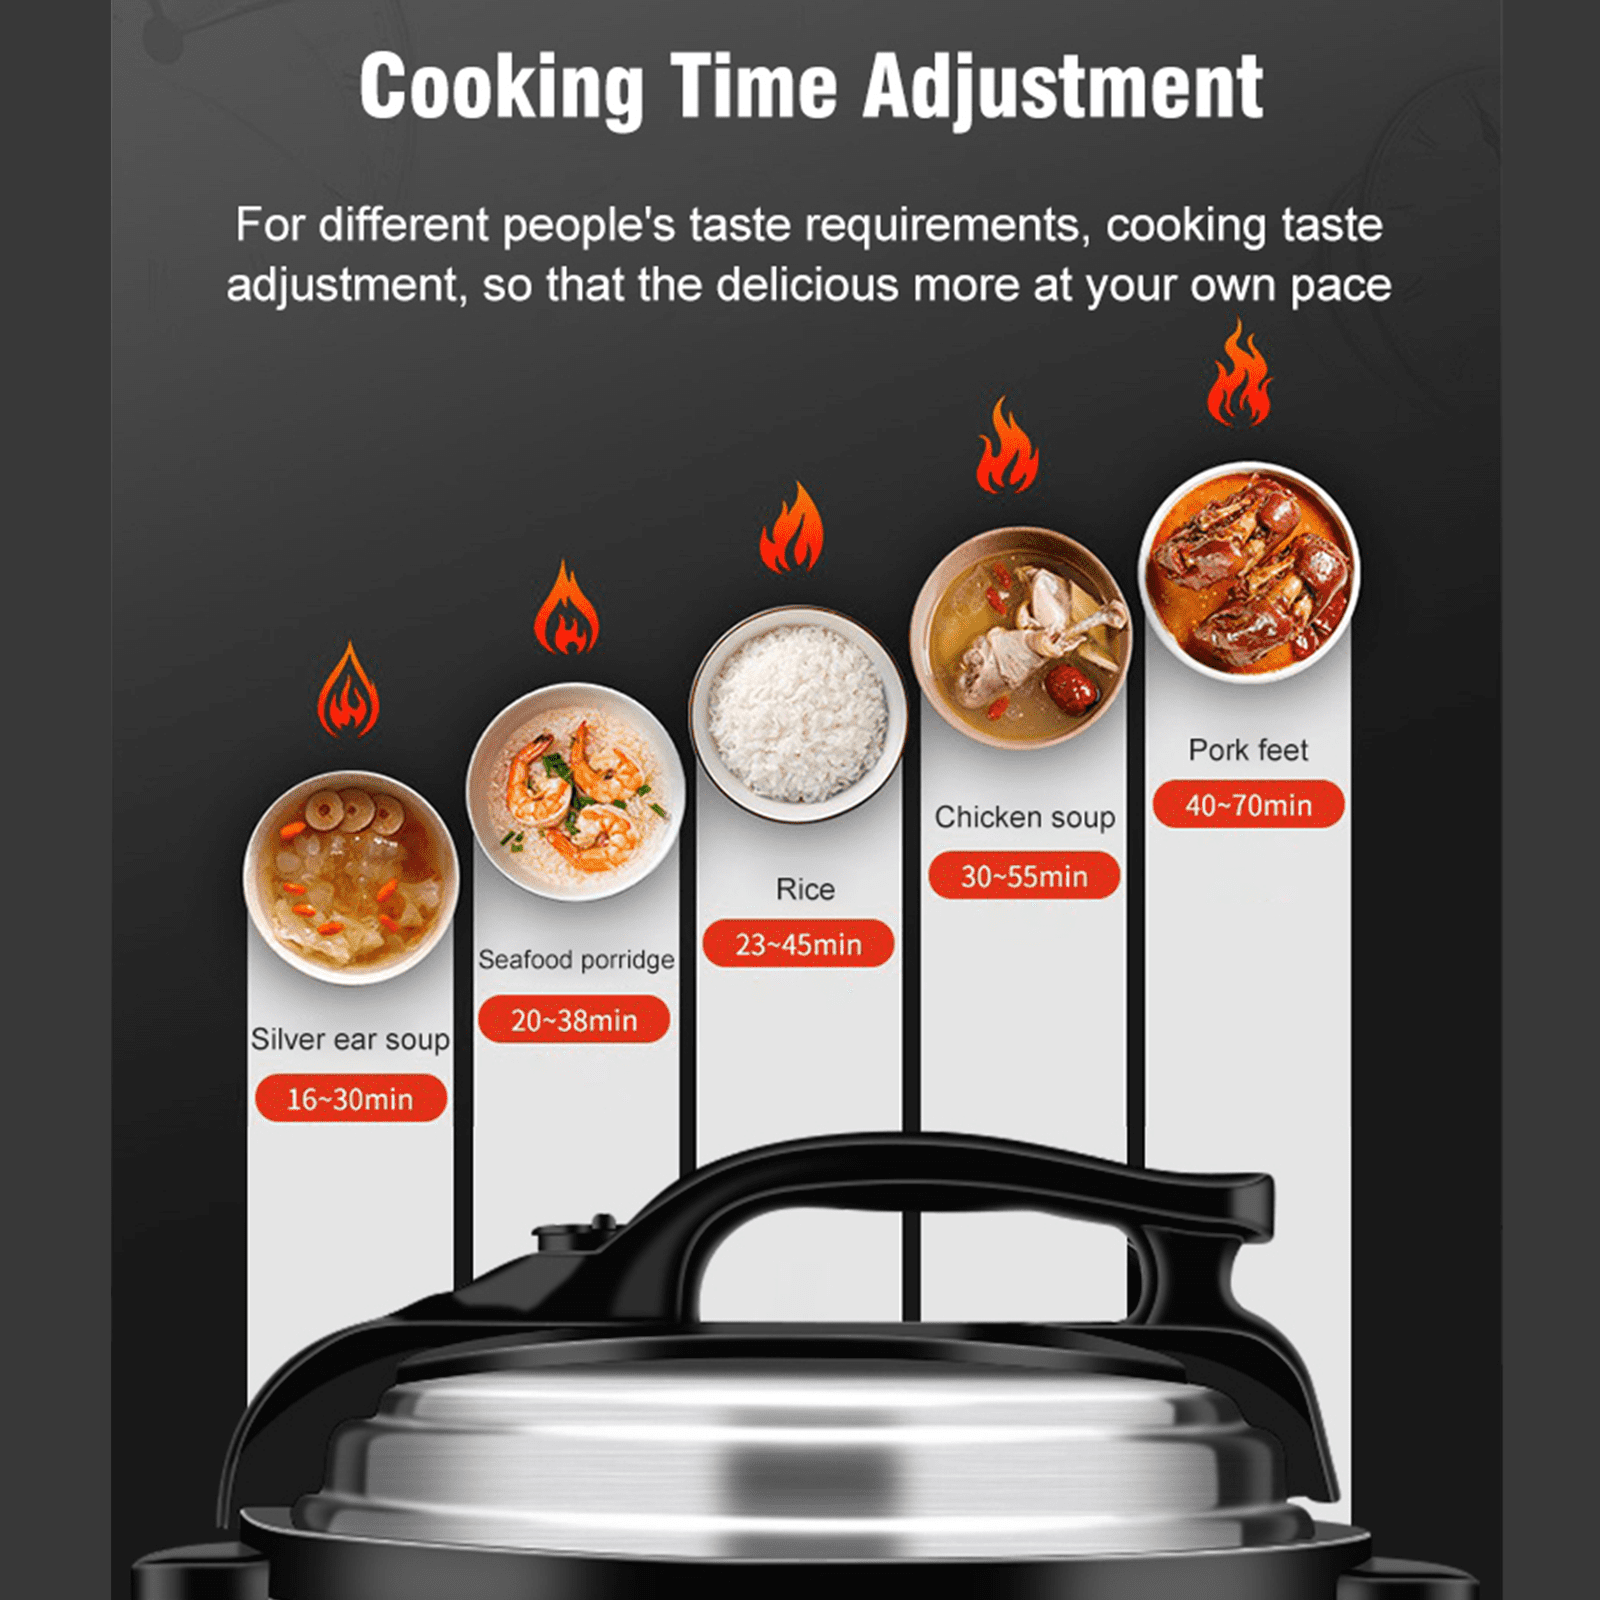 DAEWOO Double Liners Rice Cooker 4L Pressure Cooking Pot For Stew Beef  Porridge Cake 12H Timing Intelligent Kitchen Appliances